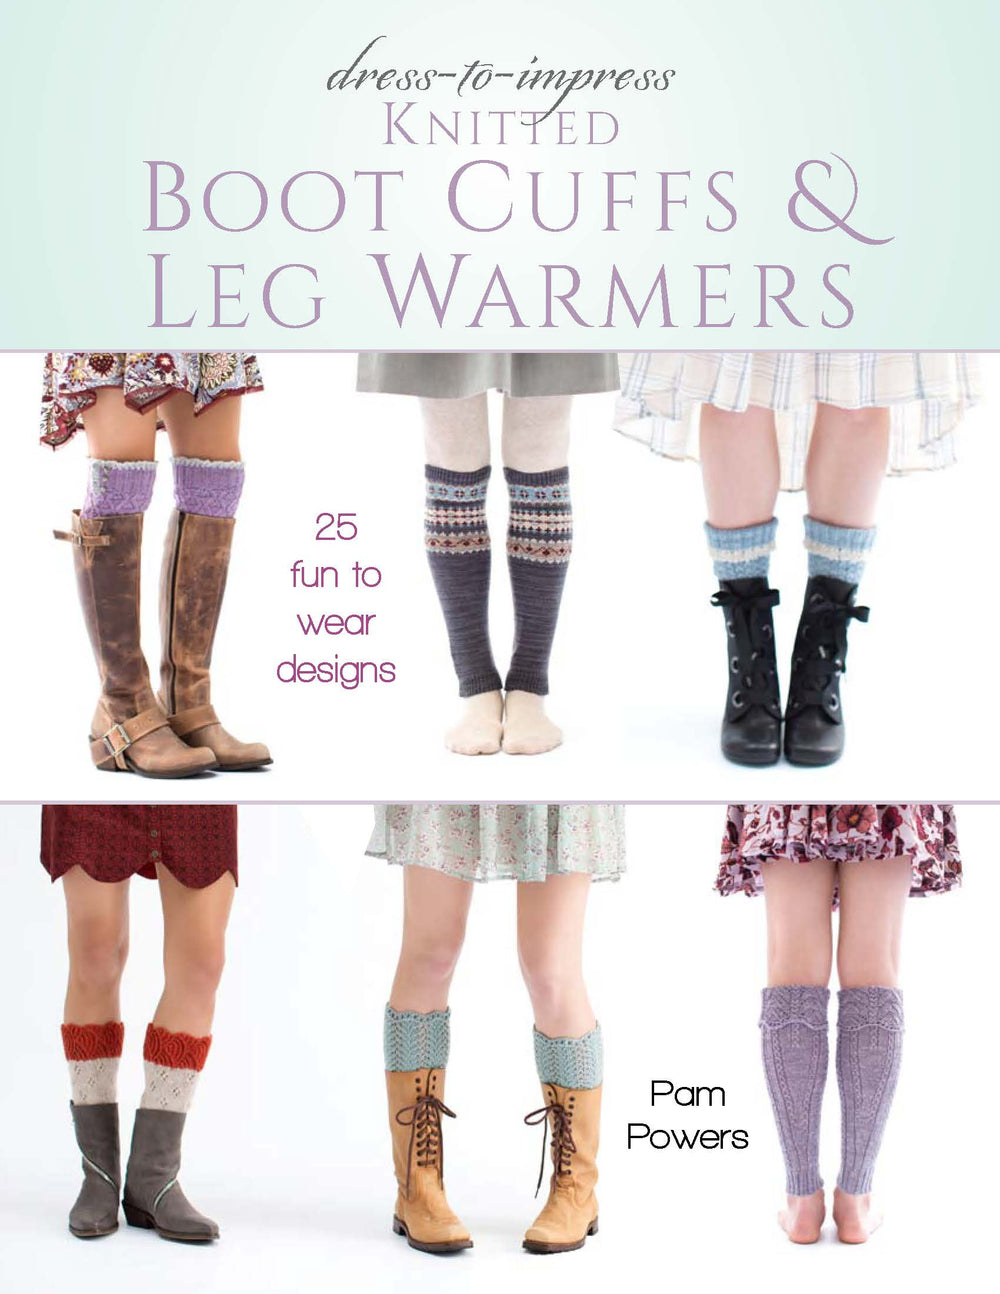 New Book Release! D-T-I Knitted Boot Cuffs & Leg Warmers – Pam Powers Knits